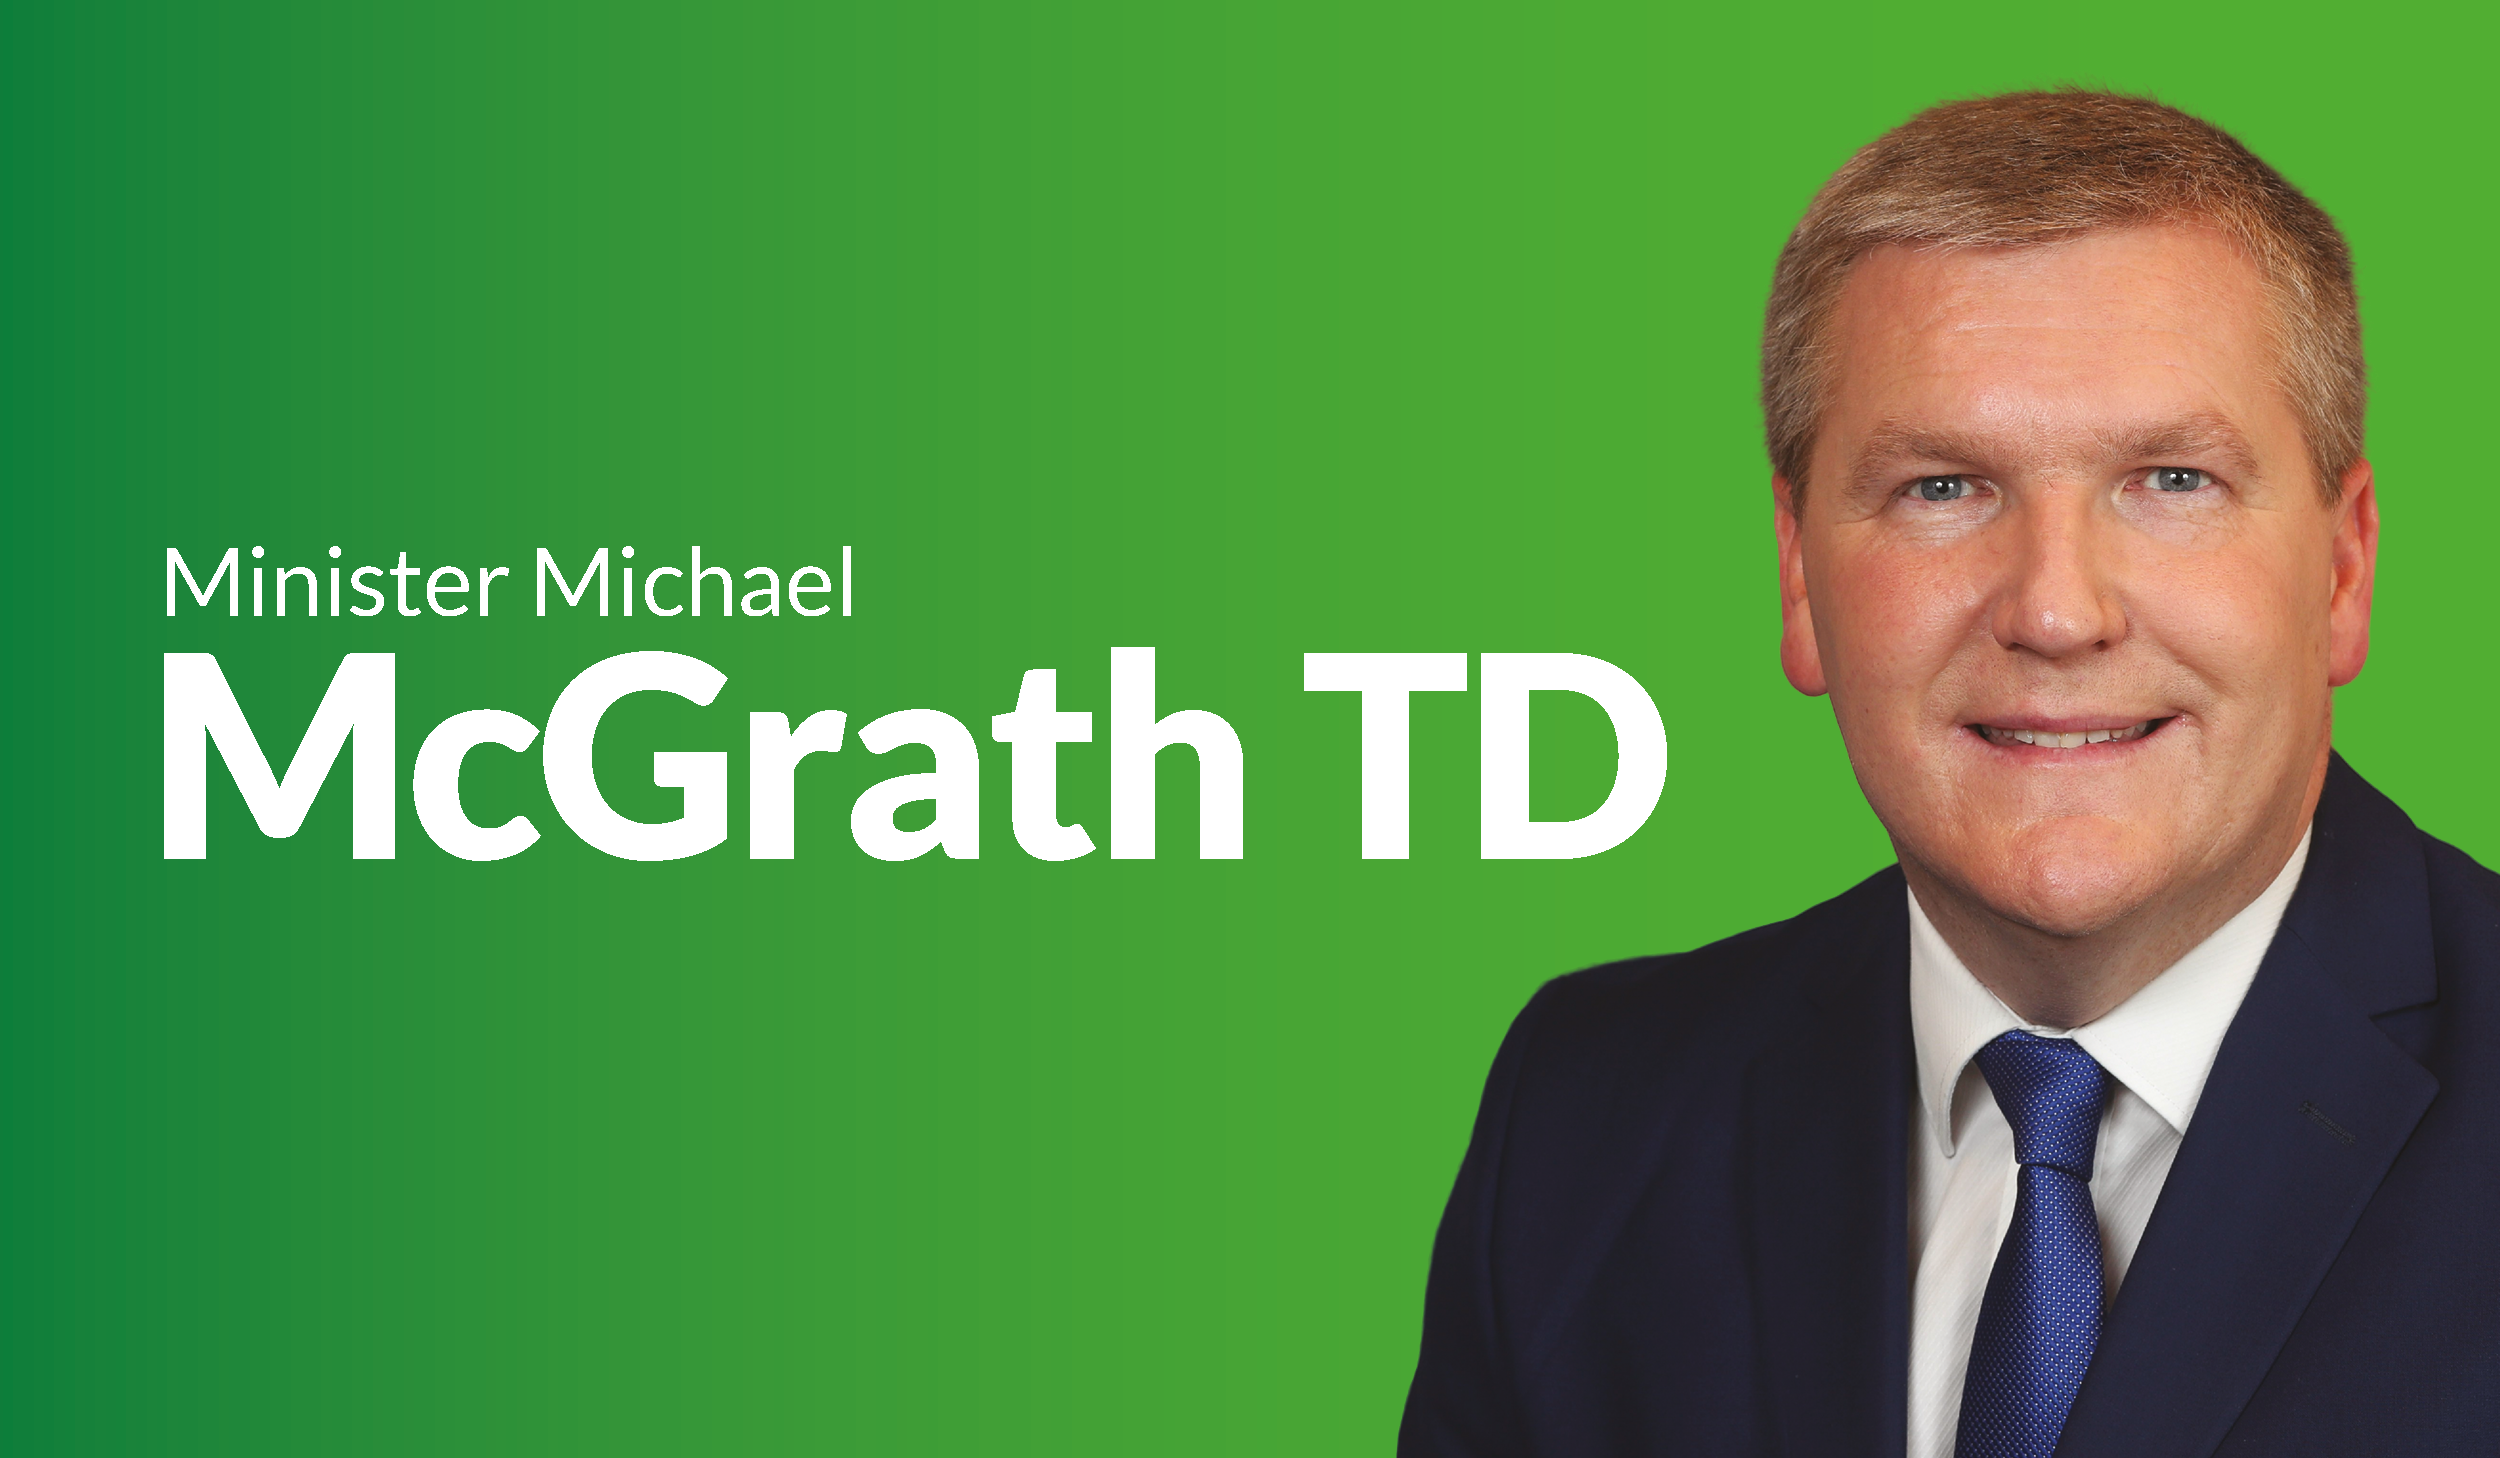 Minister McGrath asks that existing payment methods in relation to cash acceptance remain pending the completion of the NPS